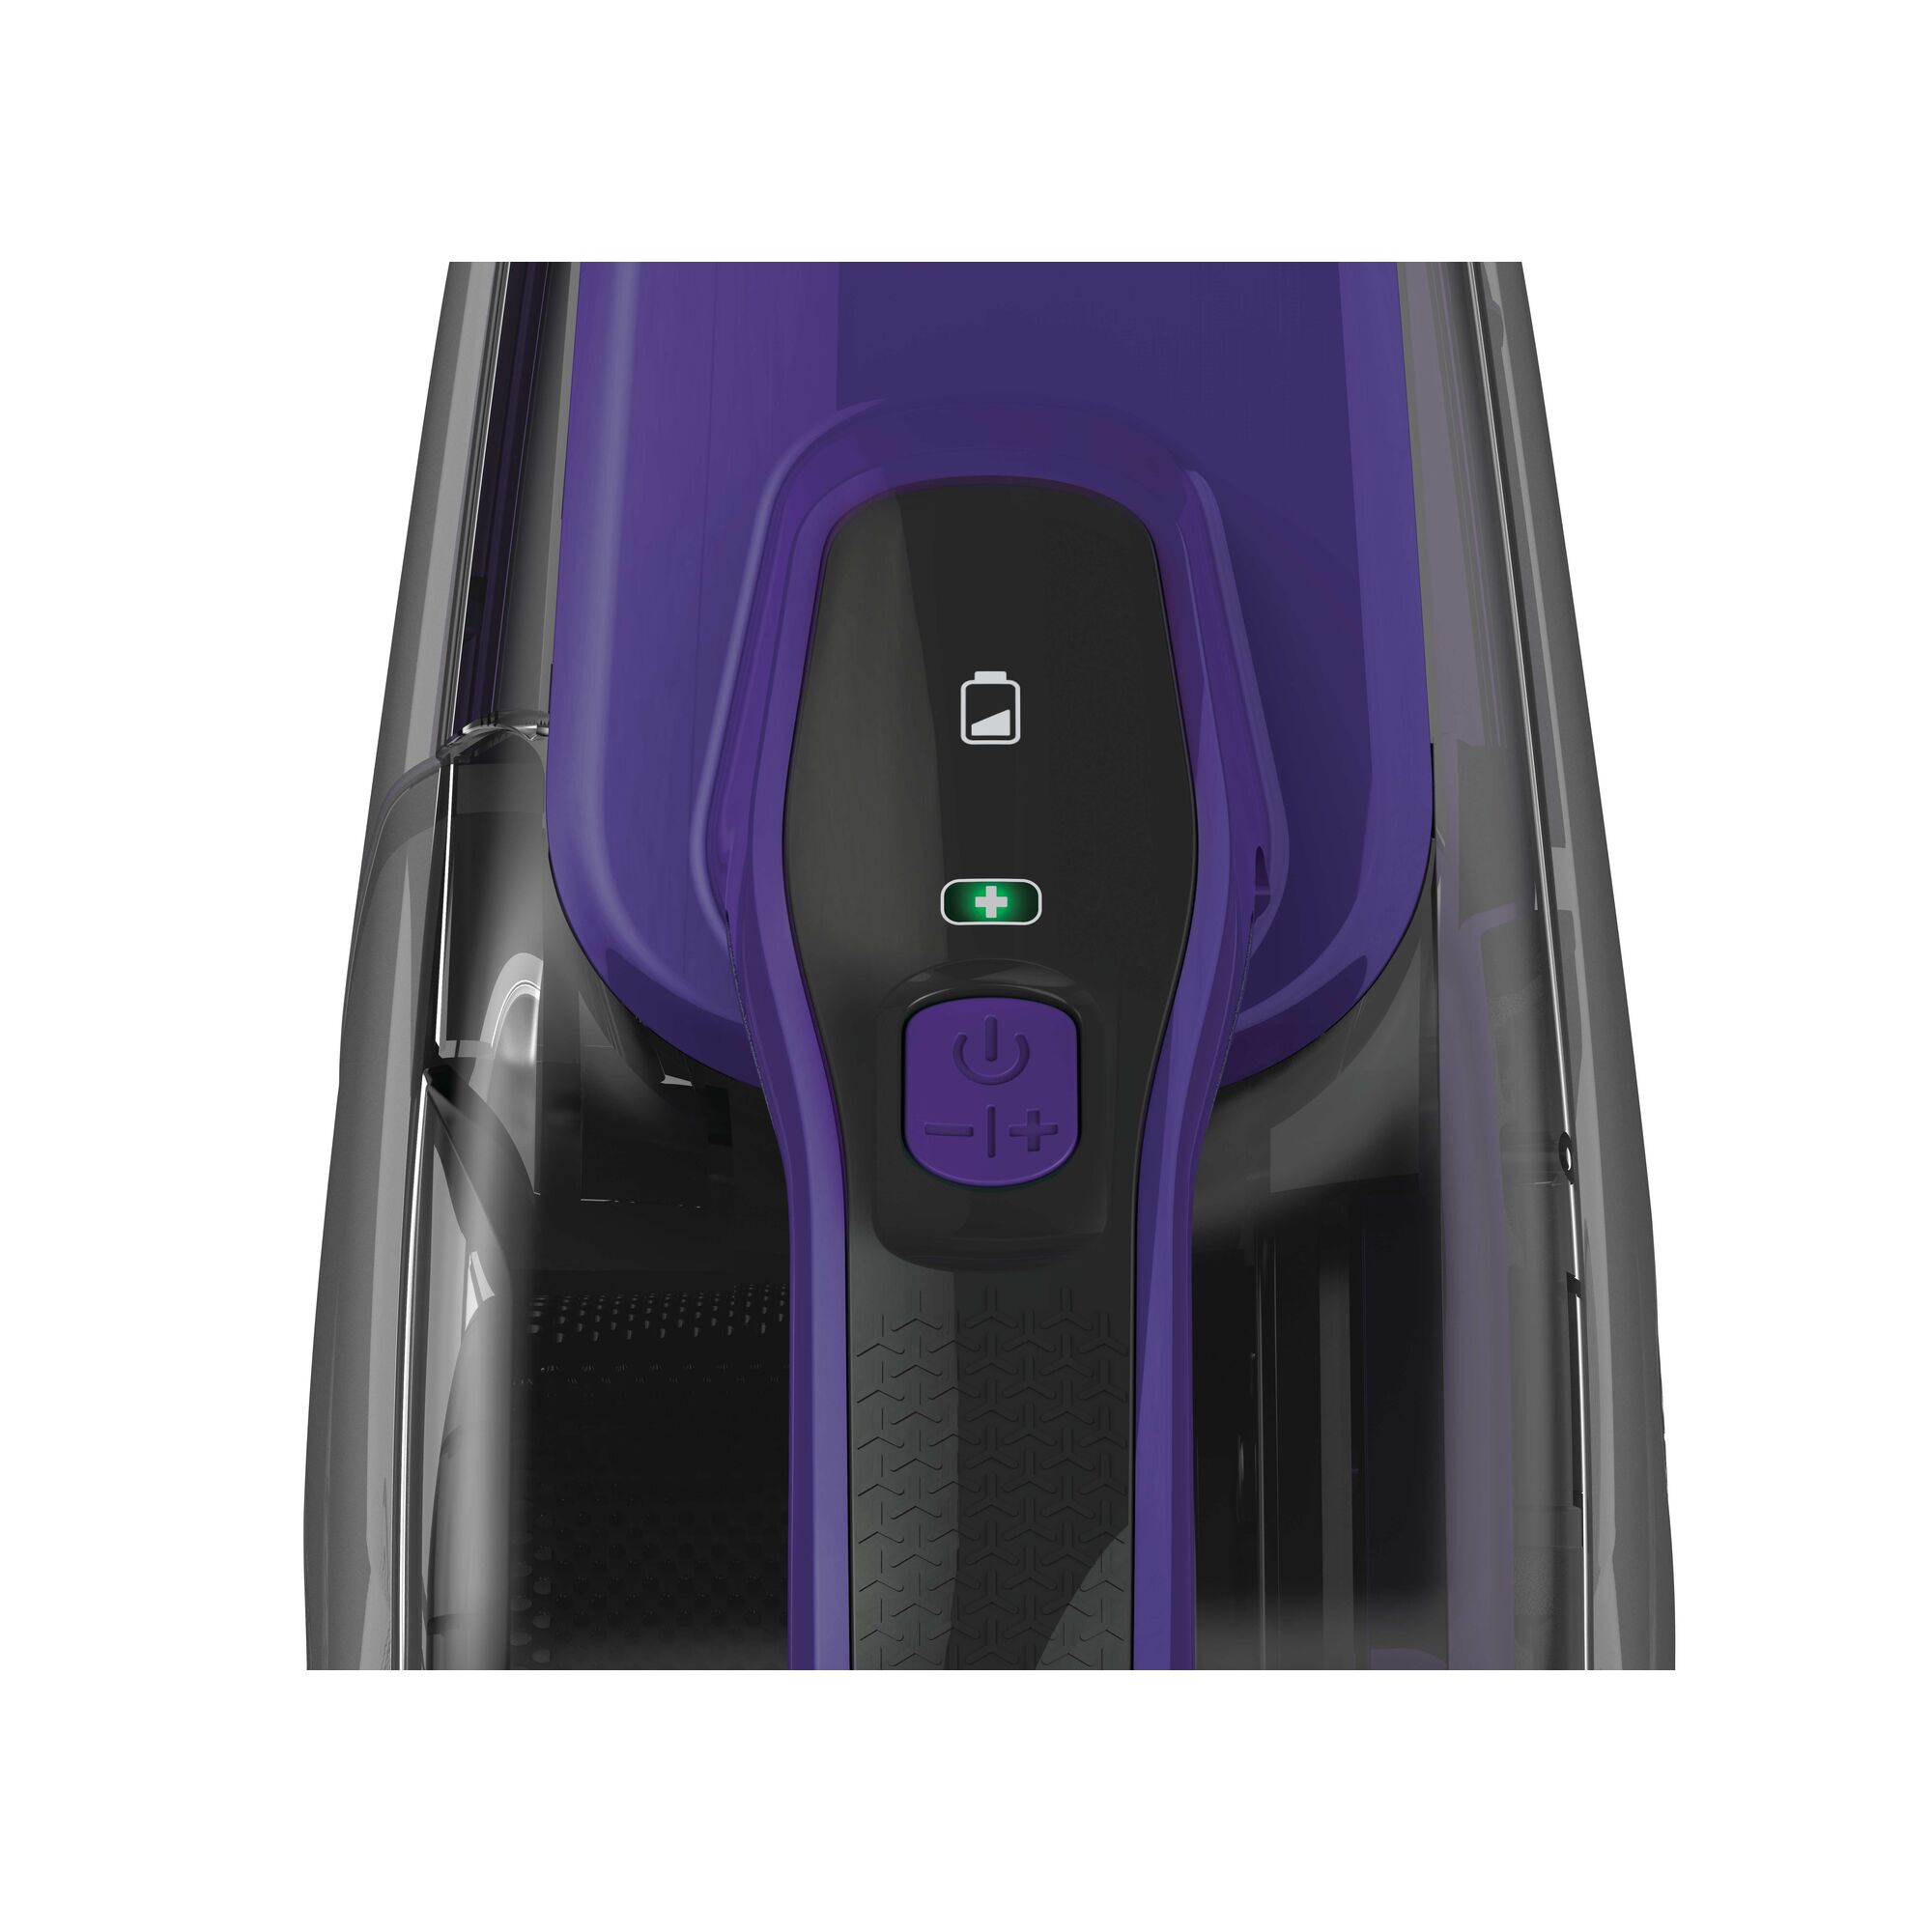 Charging indicator feature of Dust buster Hand Vacuum Pet.